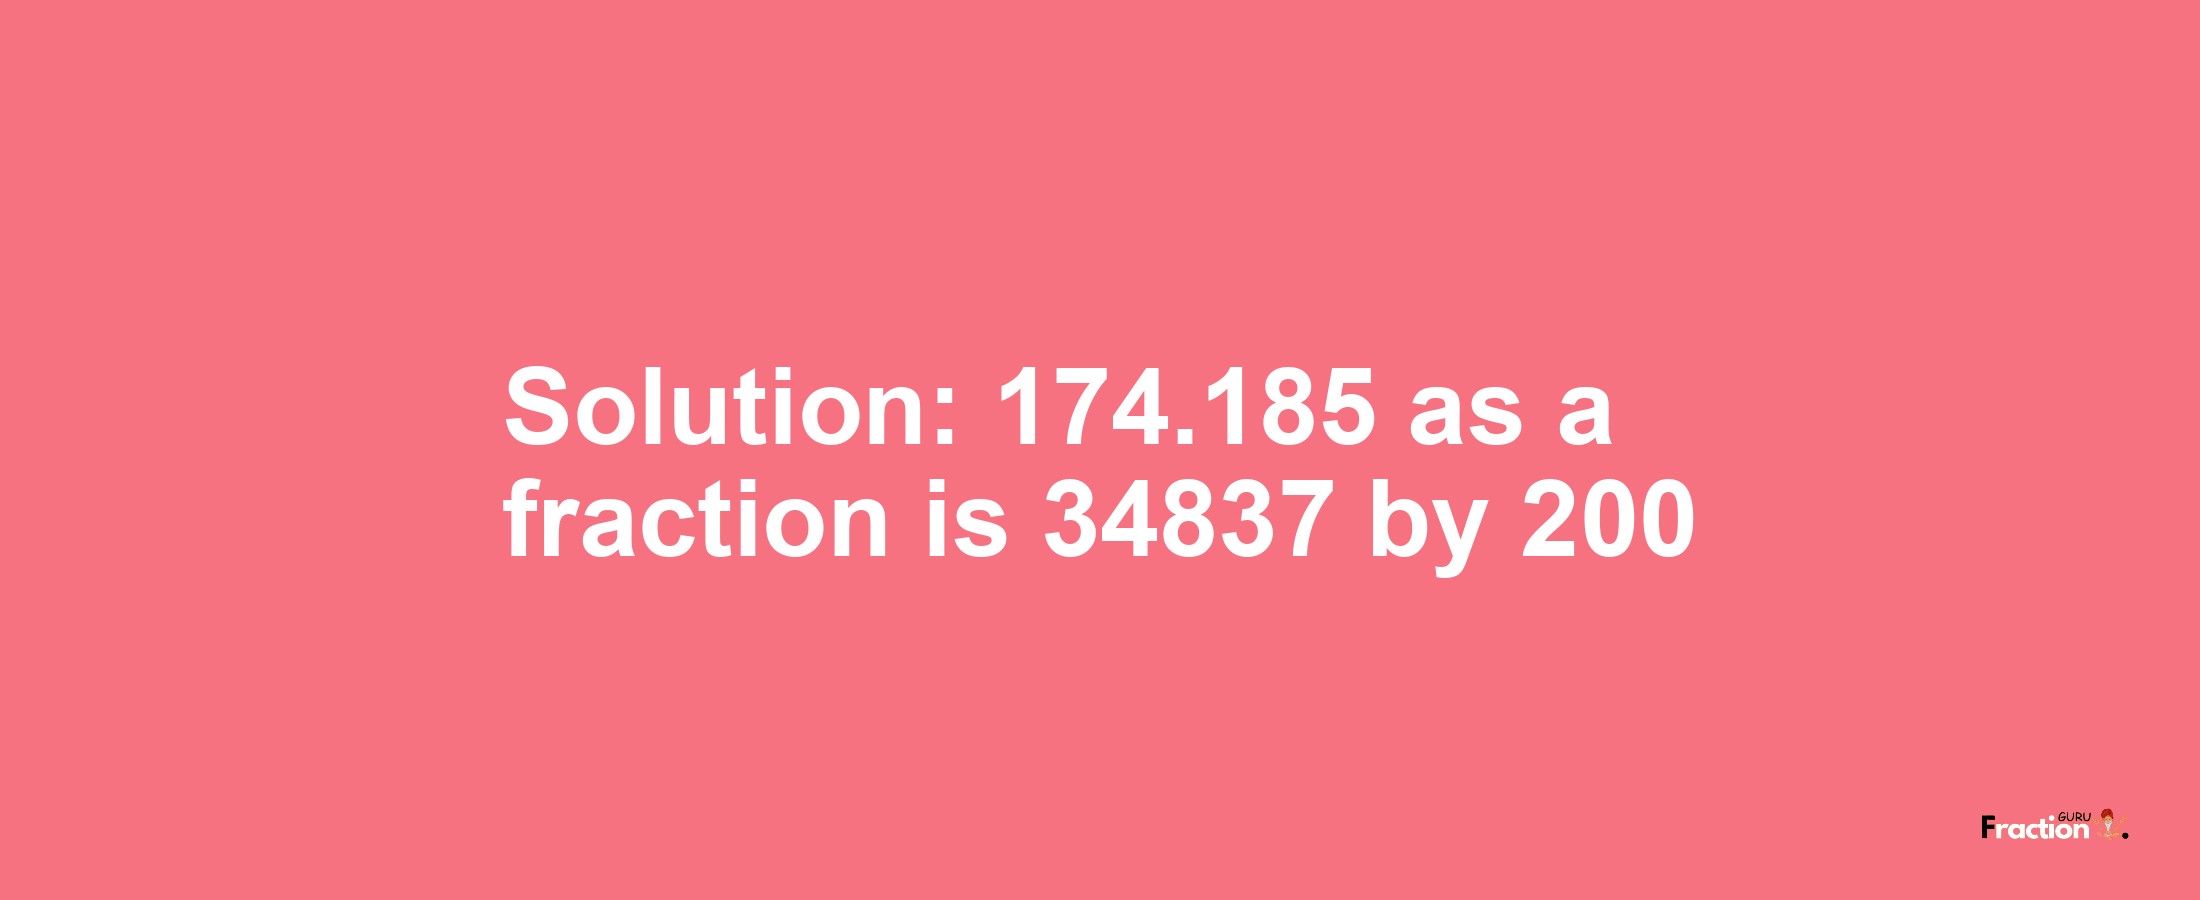 Solution:174.185 as a fraction is 34837/200